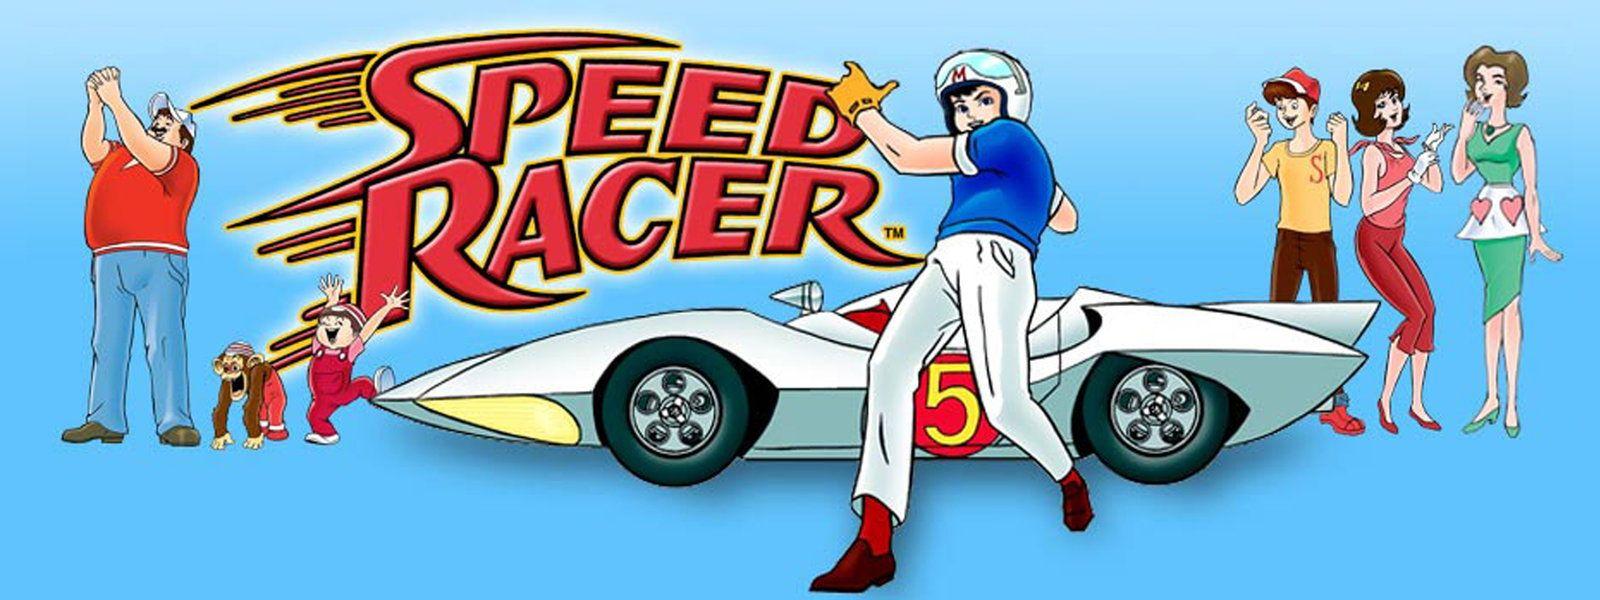 Speed Racer Wallpapers 53 images